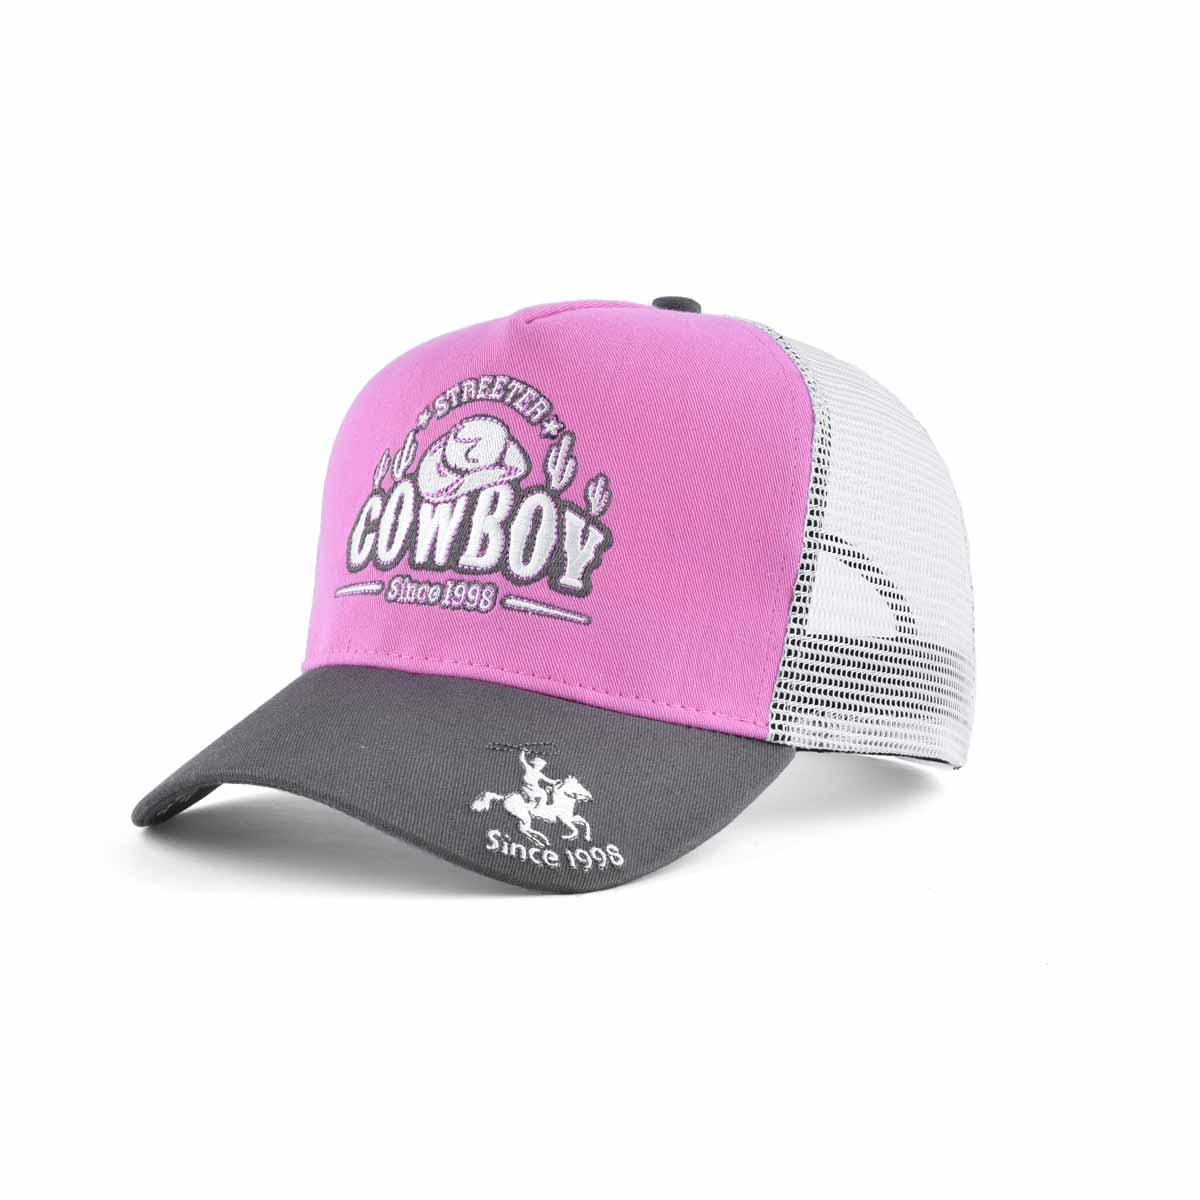 Aung Crown pink-white-grey custom embroidery trucker hat for women and men KN2012103